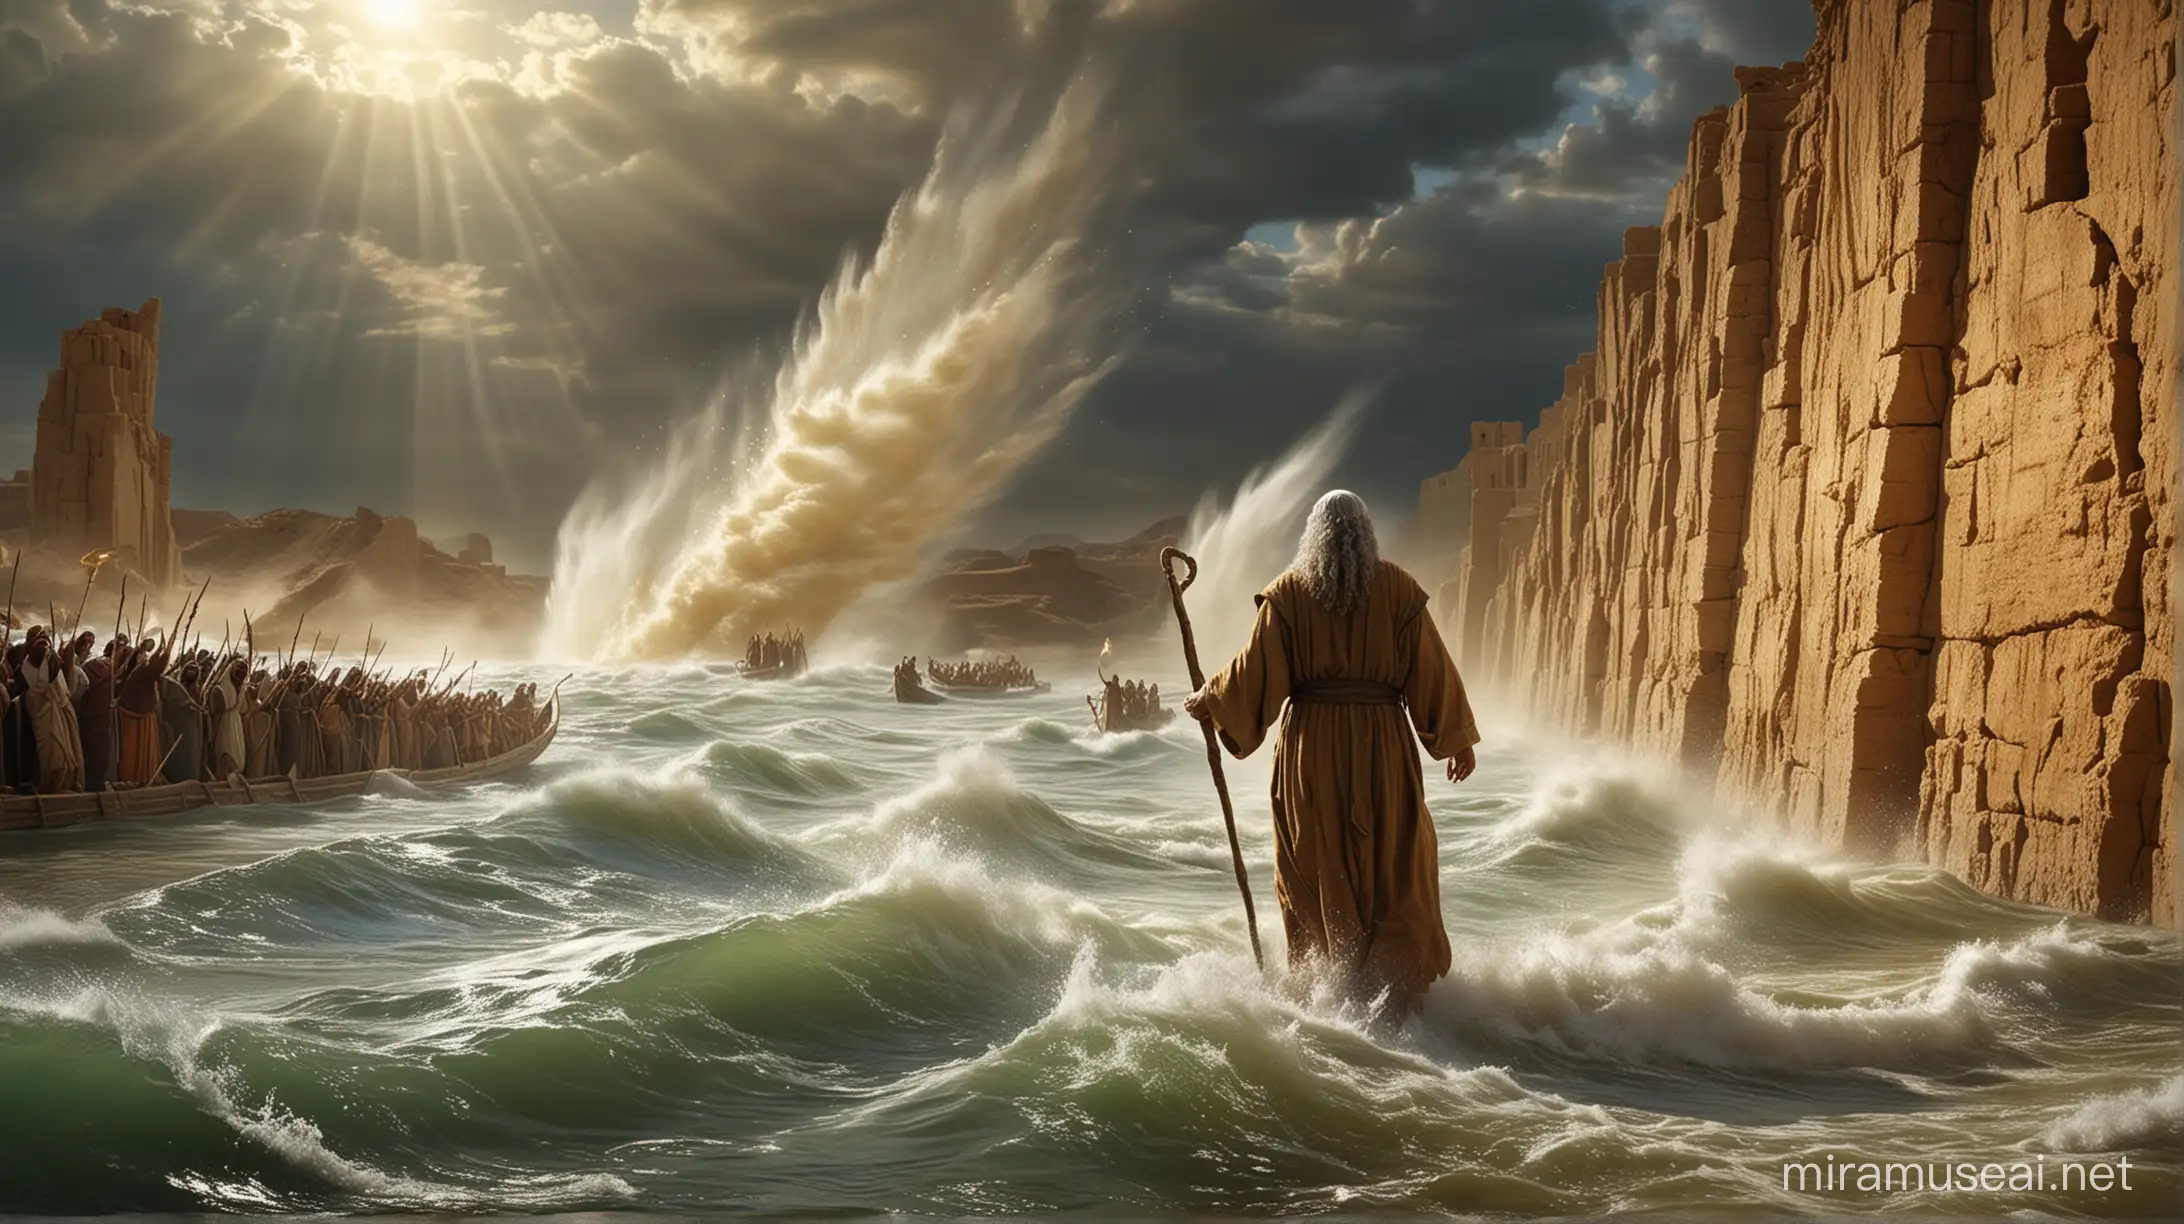 Create a vivid scene depicting Prophet Moses parting the sea, with towering walls of water on either side and the Israelites crossing the dry seabed, guided by a pillar of fire or cloud. Capture the awe-inspiring moment as Moses raises his staff, commanding the waters to split, and convey the emotions of hope, faith, and divine intervention